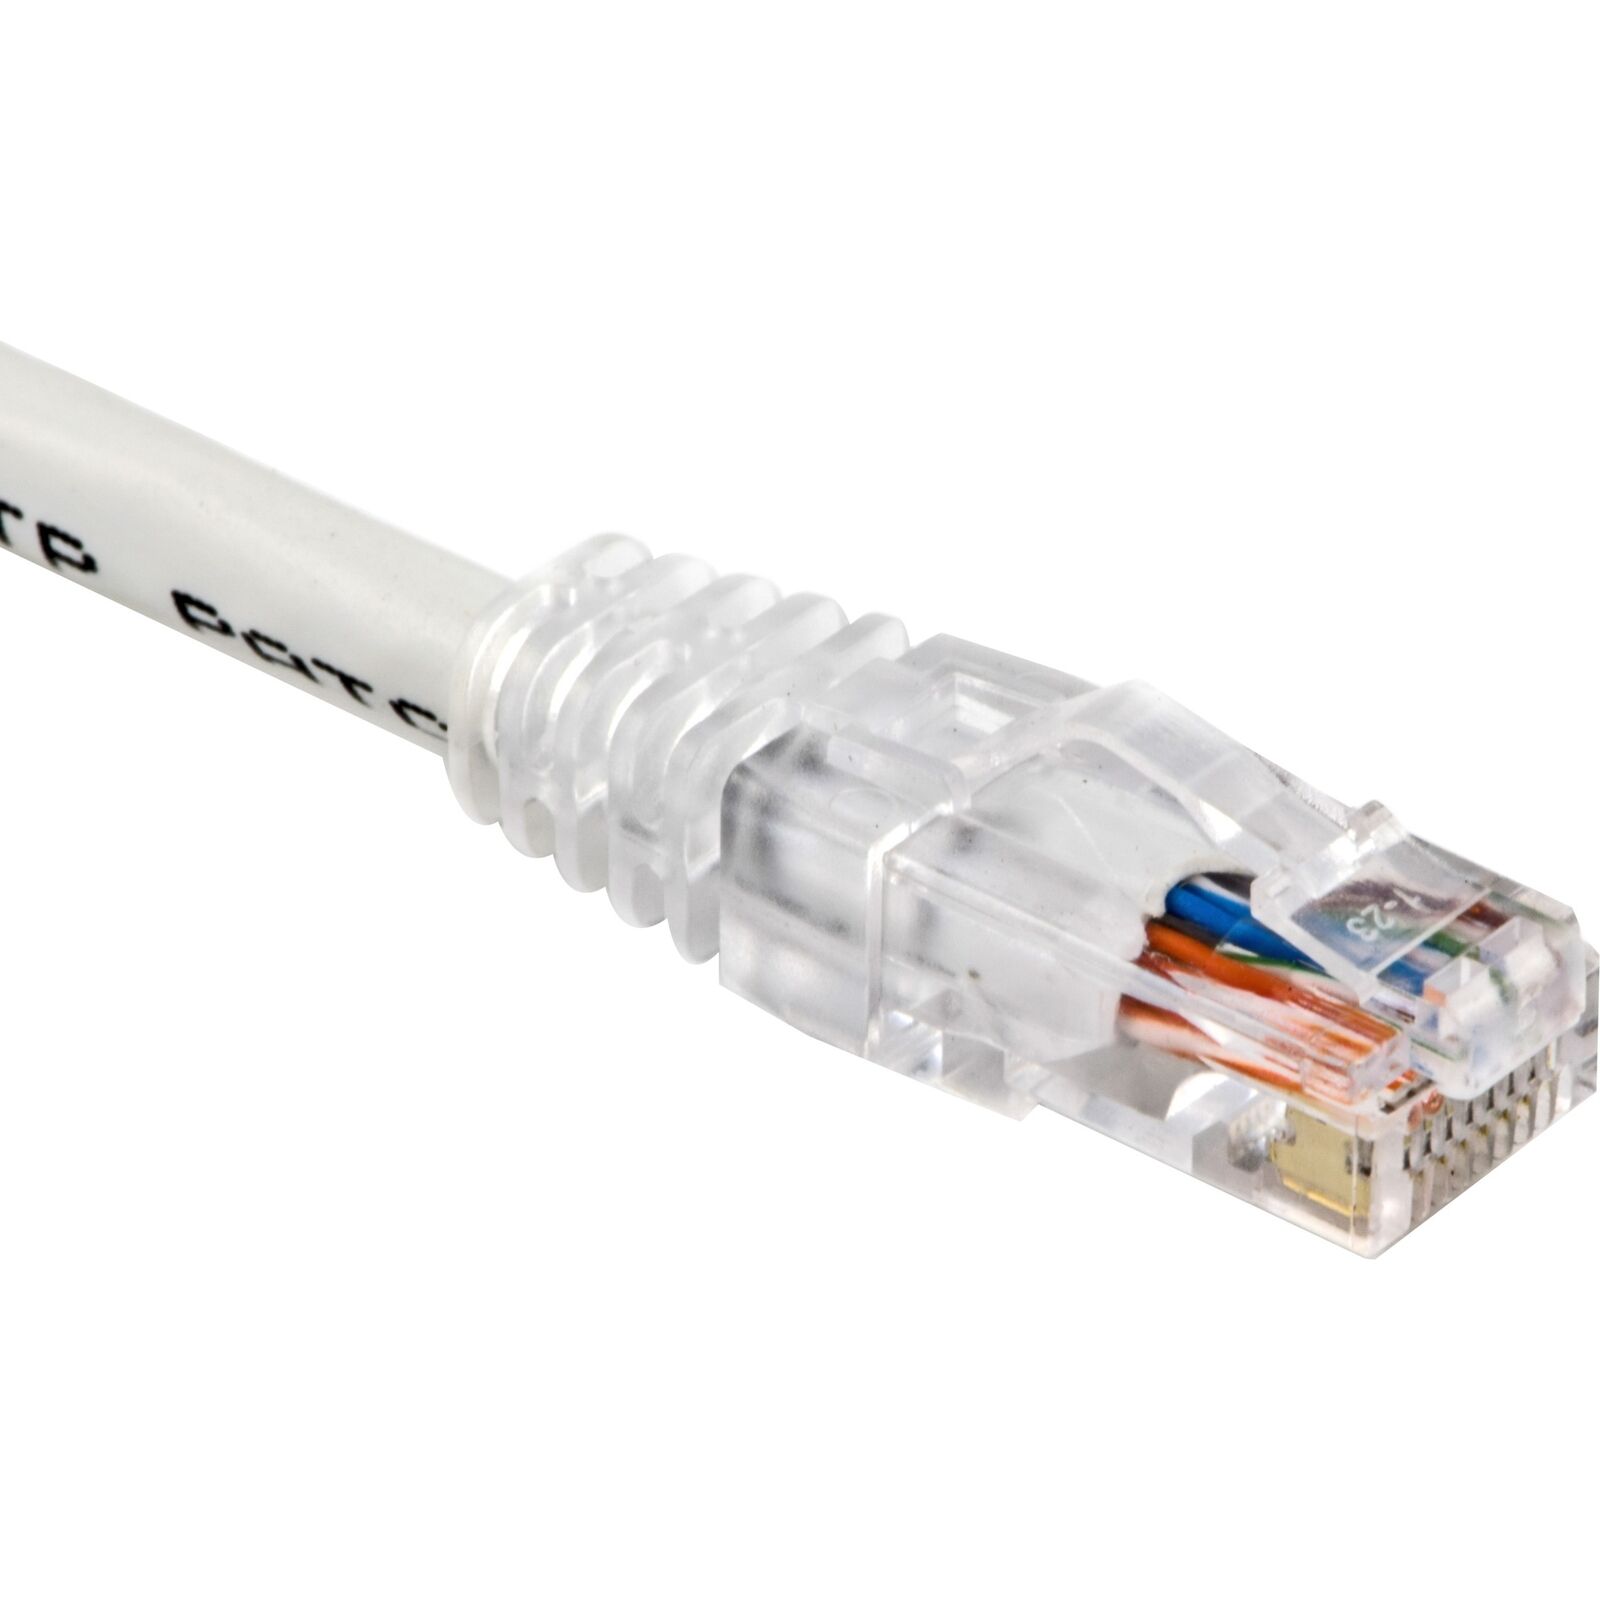 Weltron 90-C5ECB-WH-003 3ft Cat 5e White Rj45 Snagless Network Patch Cable - 3